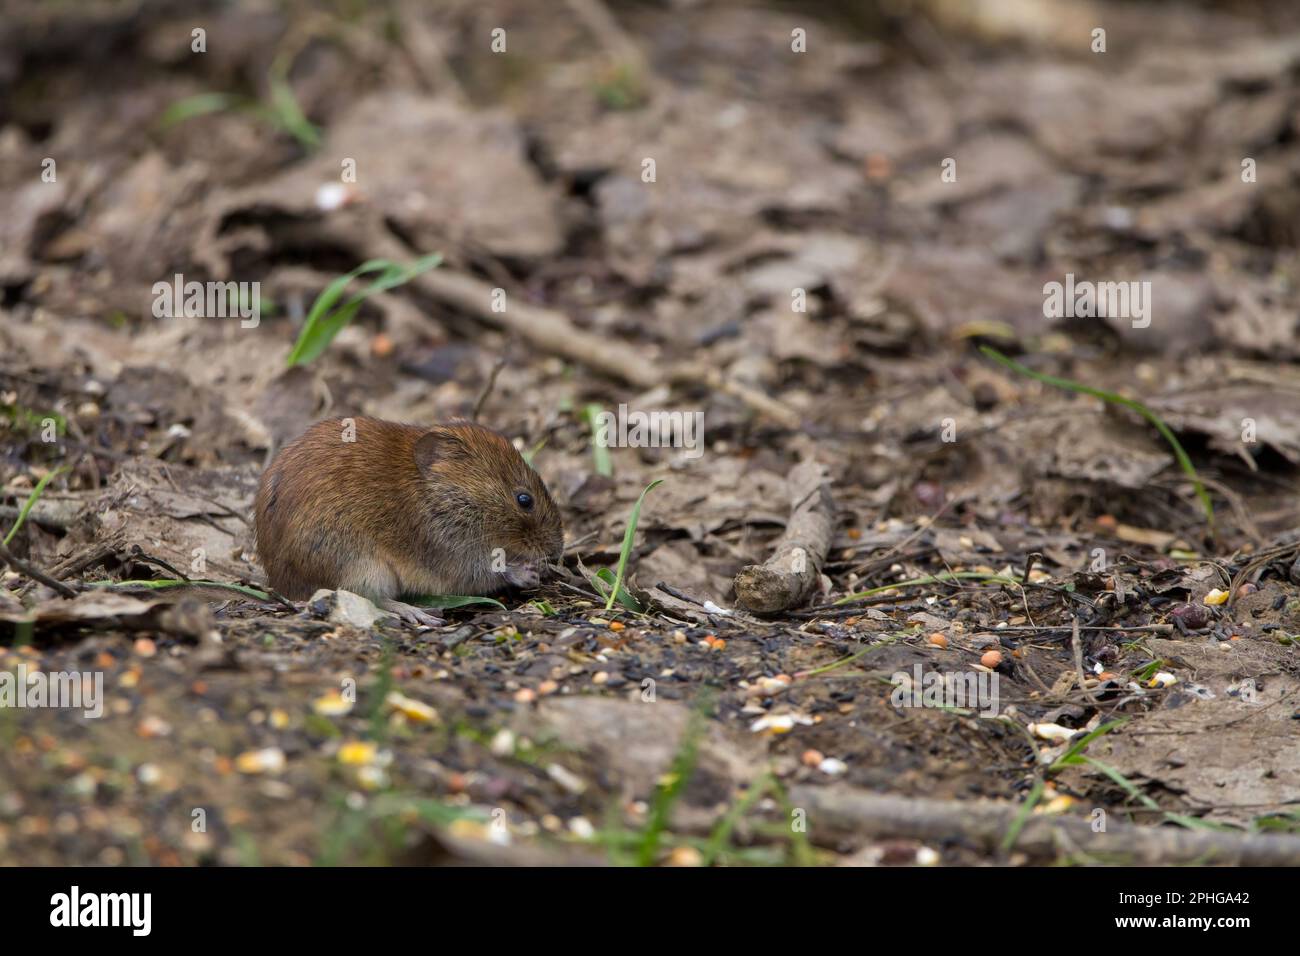 Bank vole Clethrionomys glareolus Glossy chestnut brown coat small exposed ears short hairy tail grey underside blunt nose, in bird hide eating seed Stock Photo